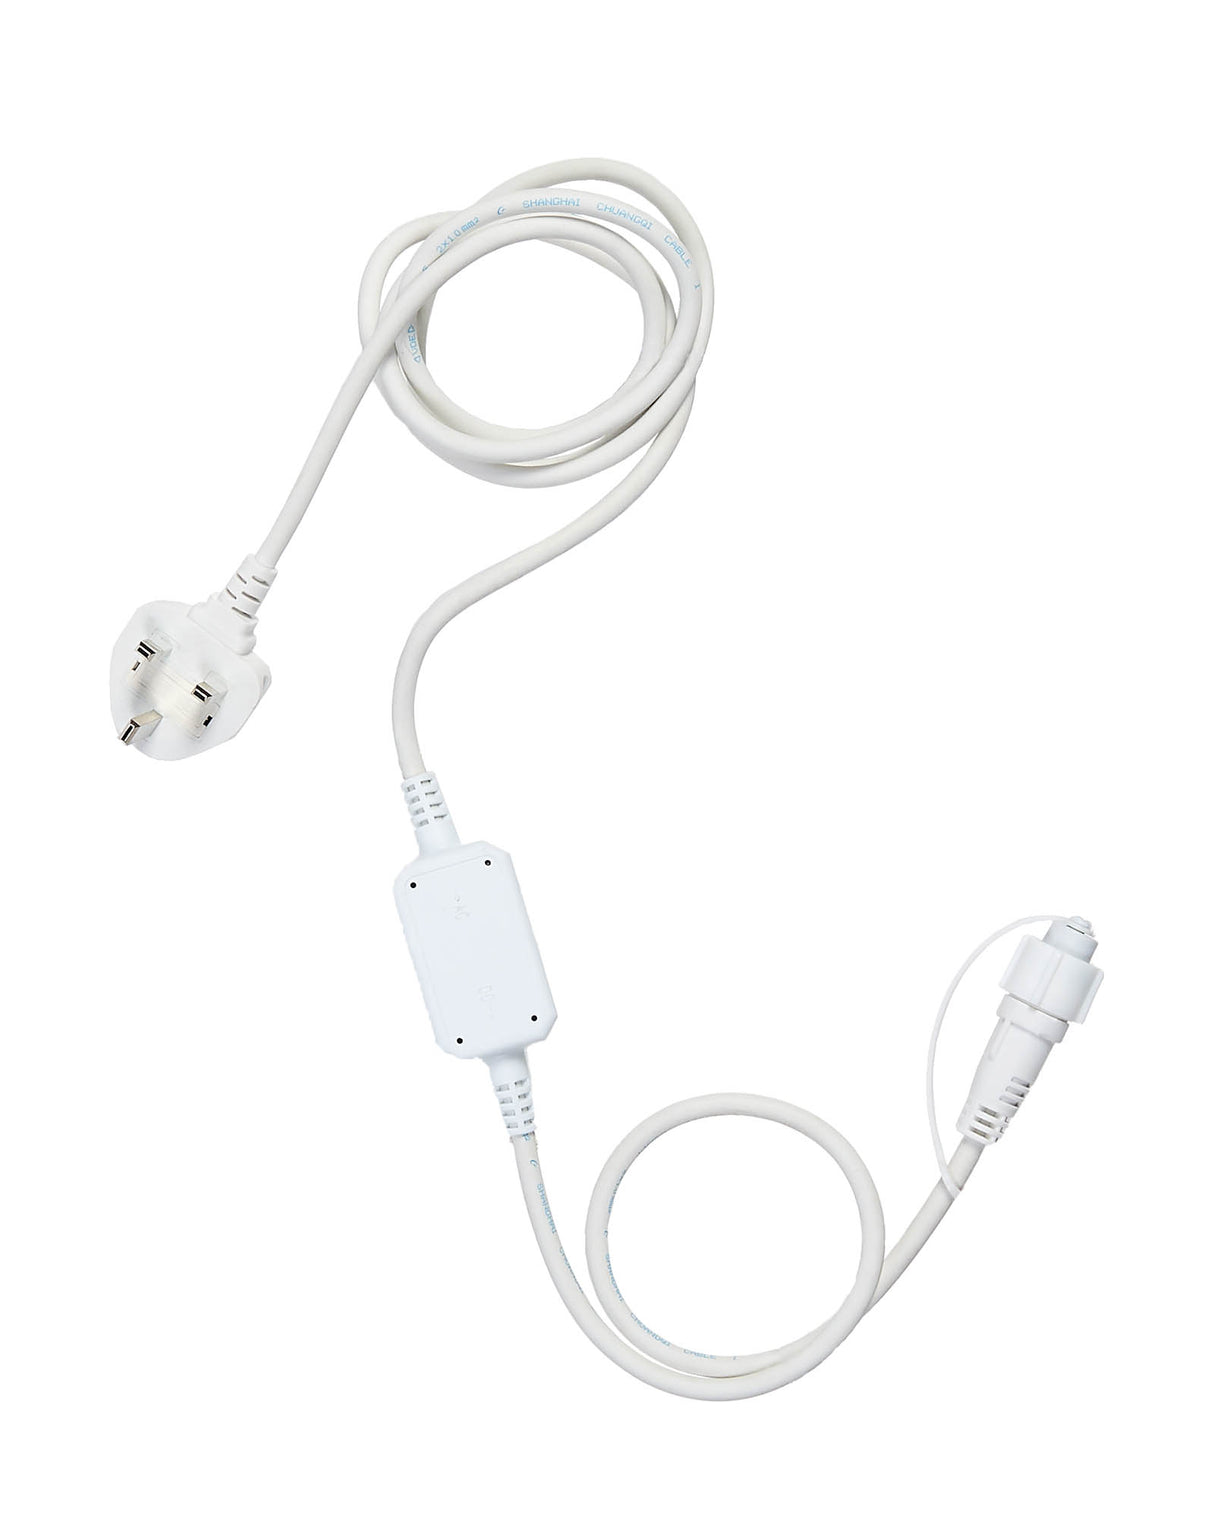 LINK PRO 2m White Starter Cable - Powers up to 20,000 LEDs